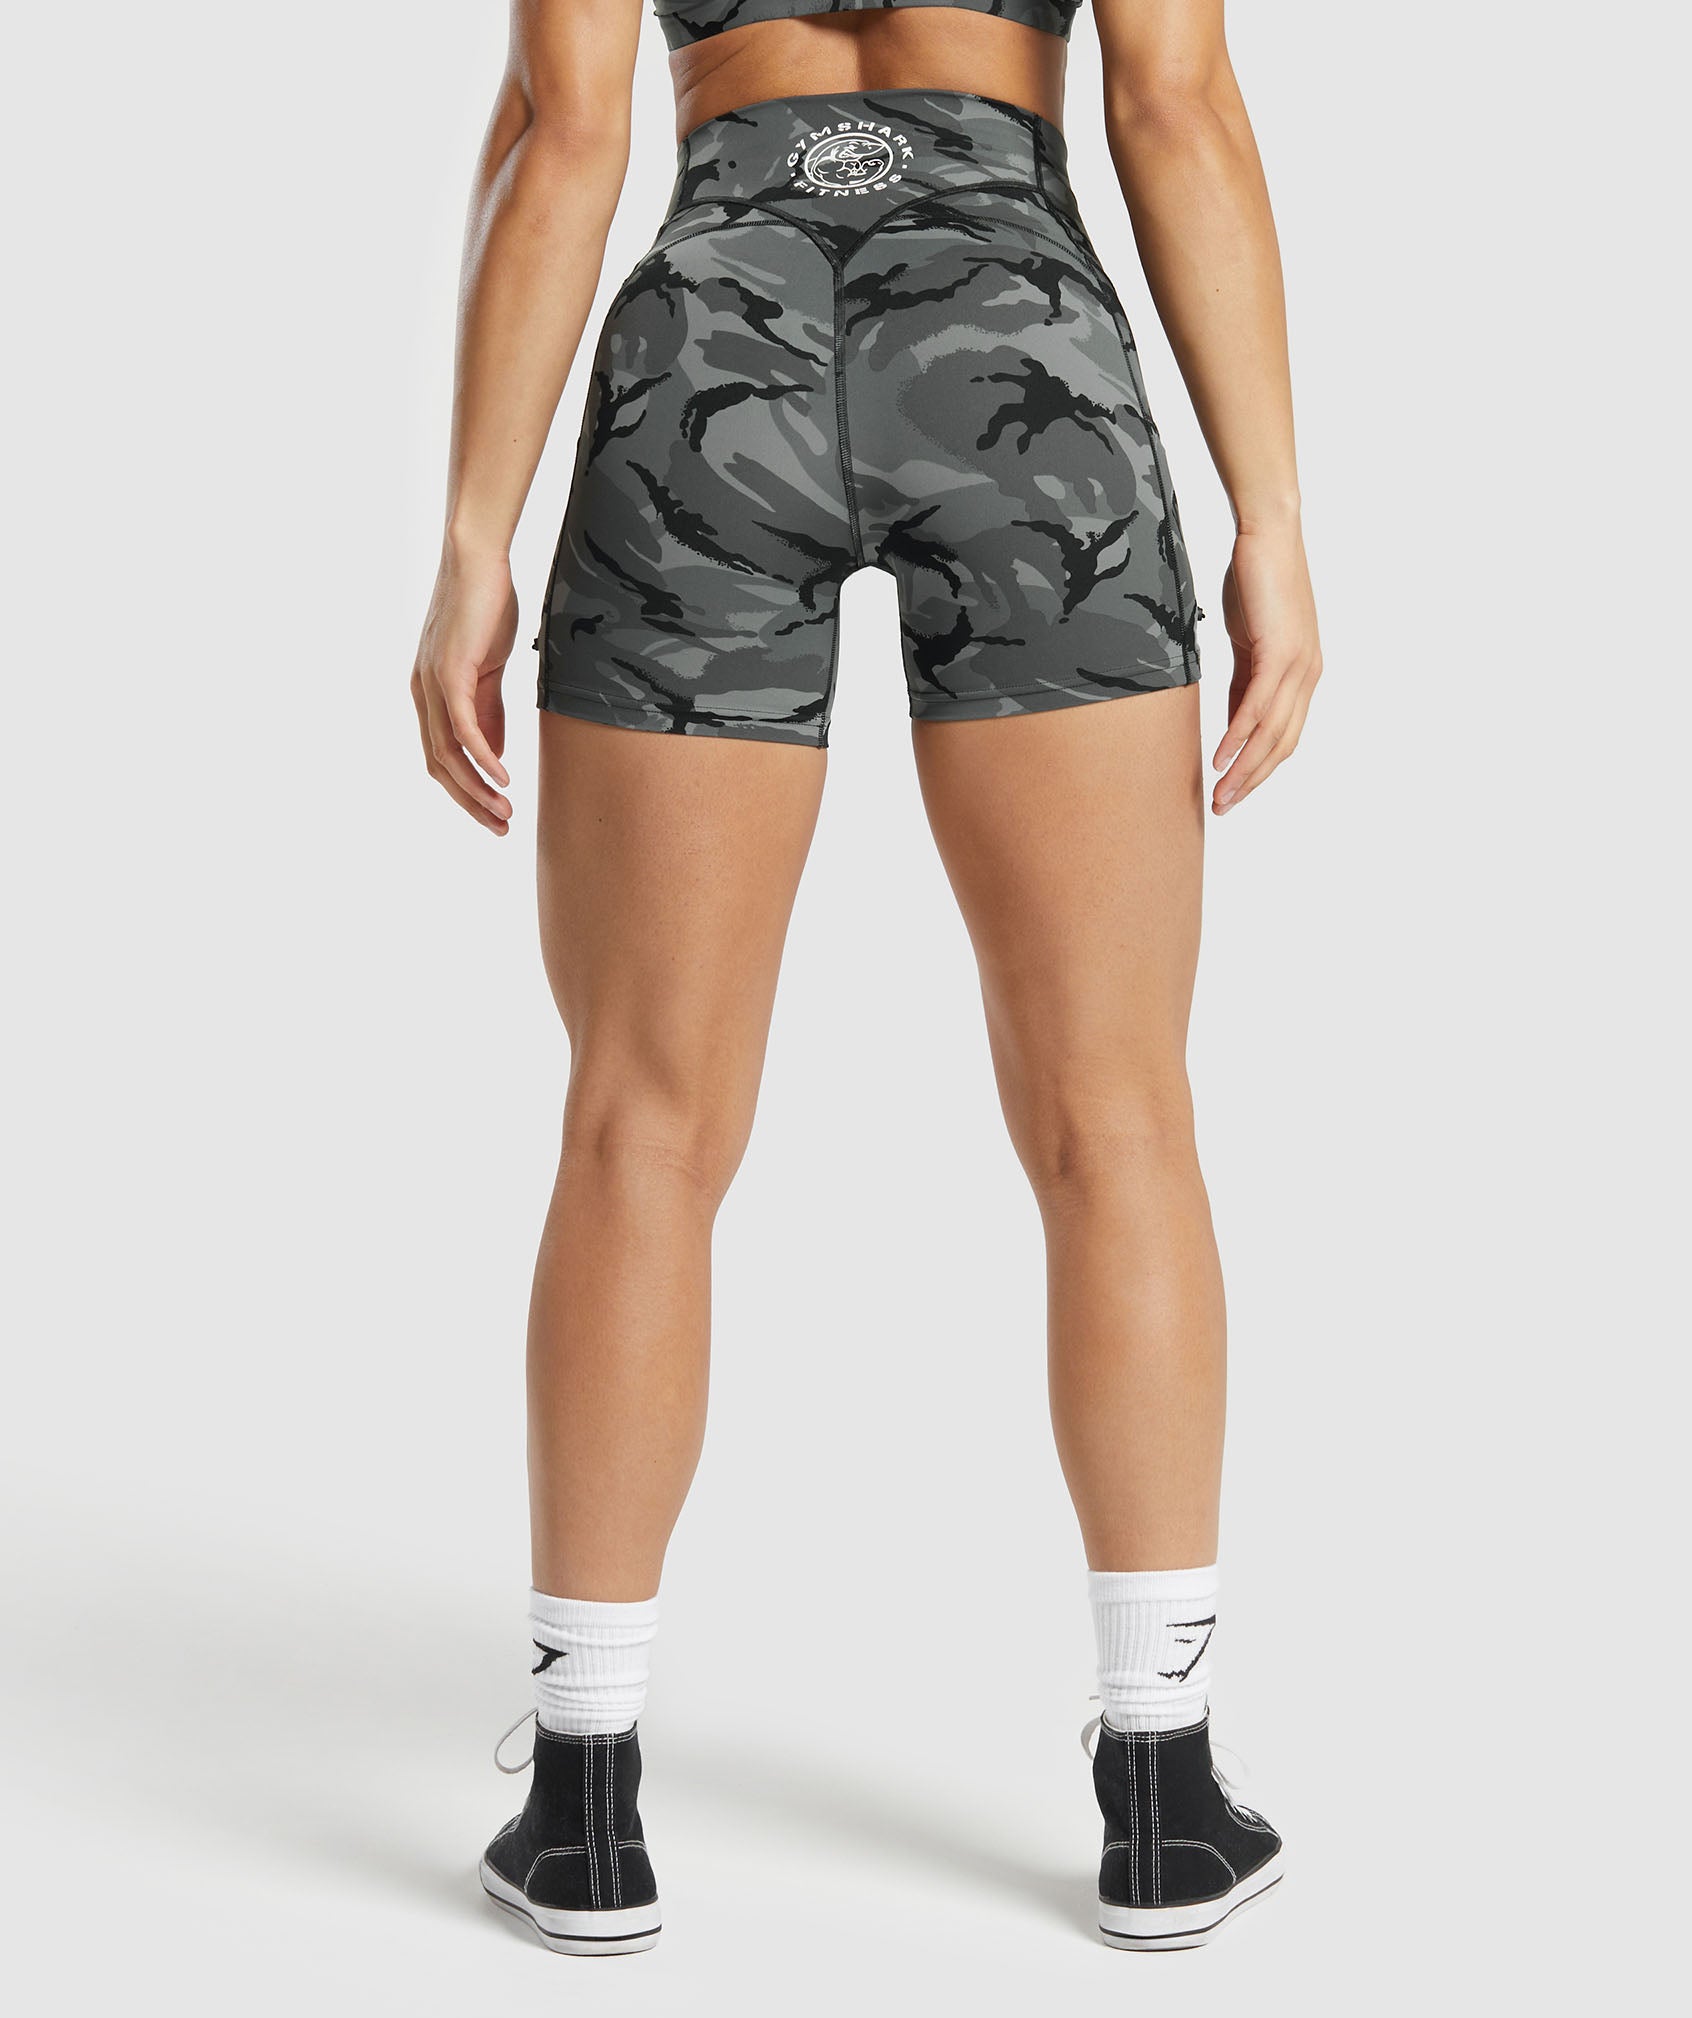 Gymshark Legacy Luxe Shorts Black Size M - $40 (81% Off Retail) - From Katie